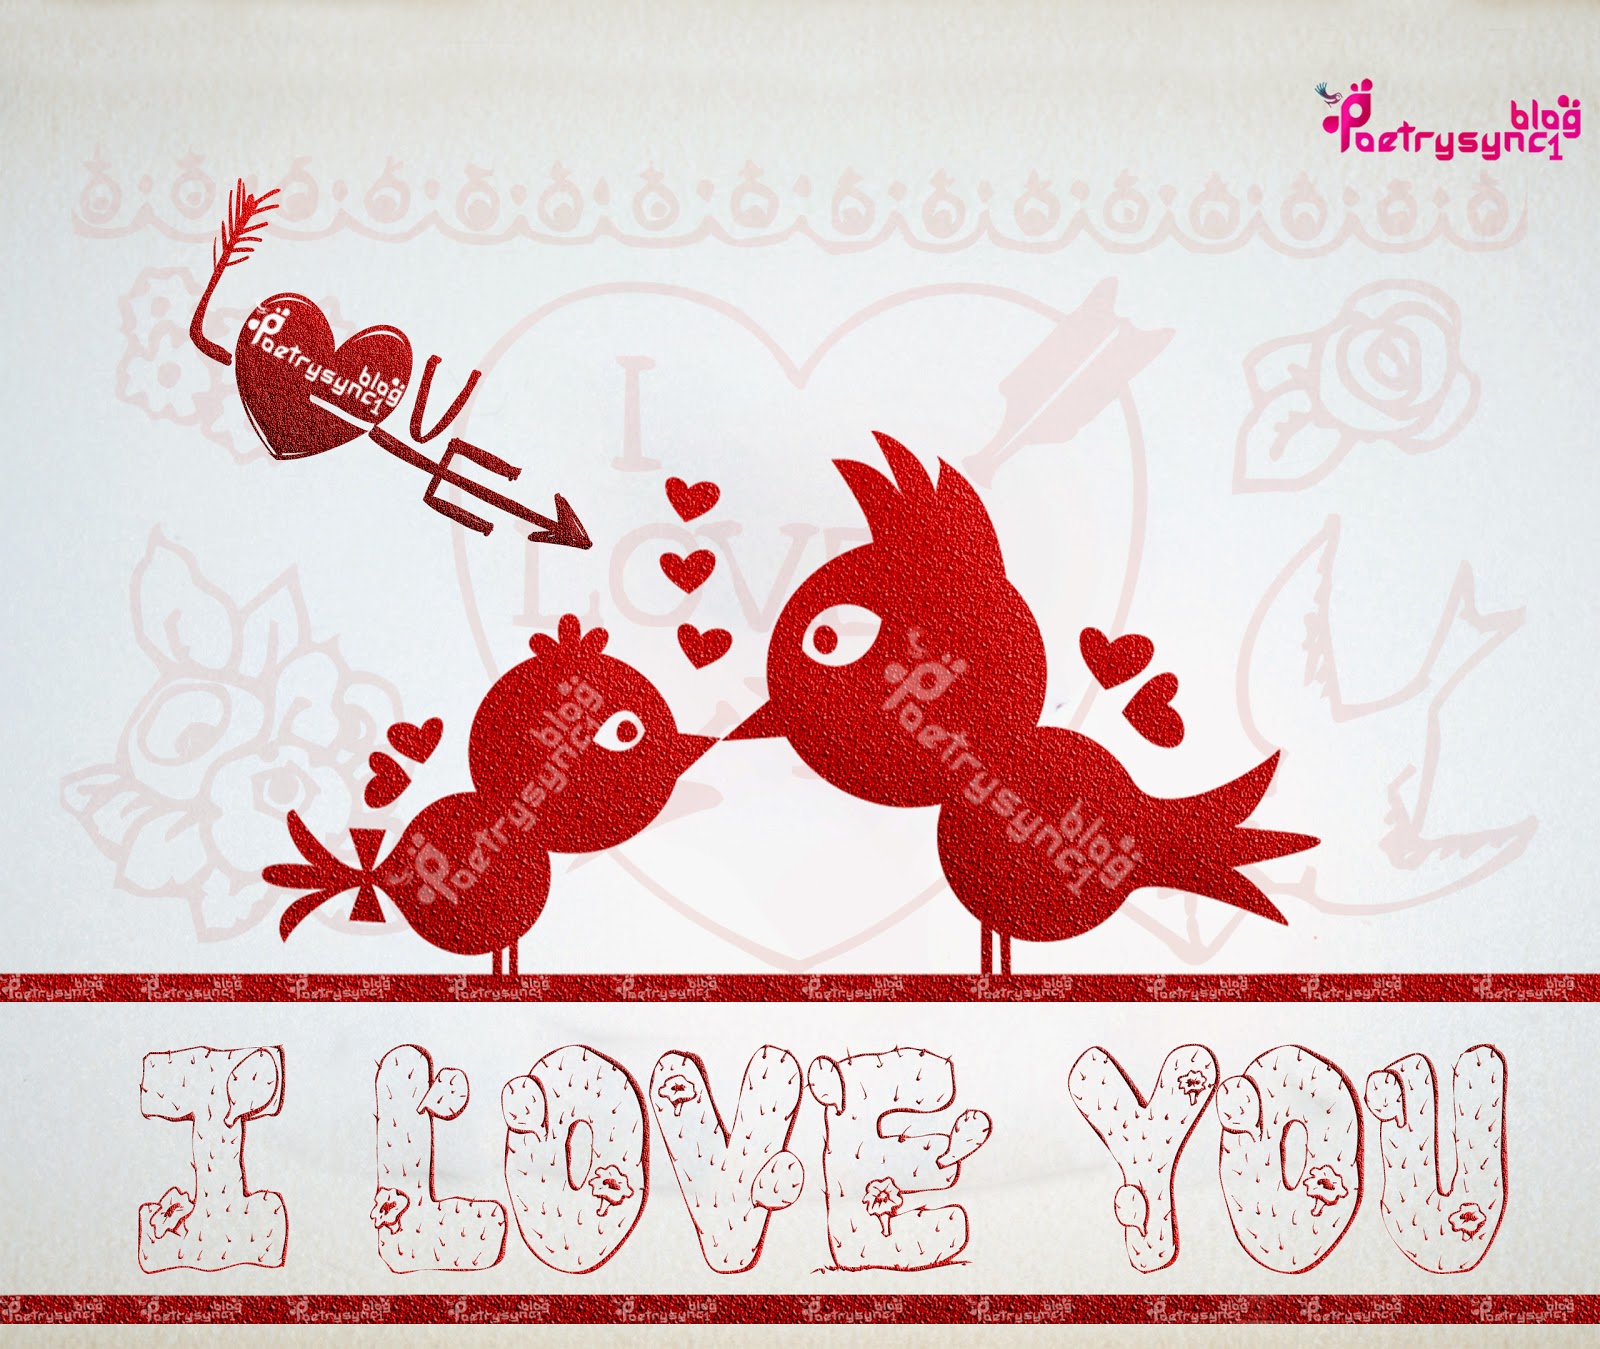 I Love You 3d Image In Red Colour By Poetrysync1 - True Love Will Always Find A Way - HD Wallpaper 